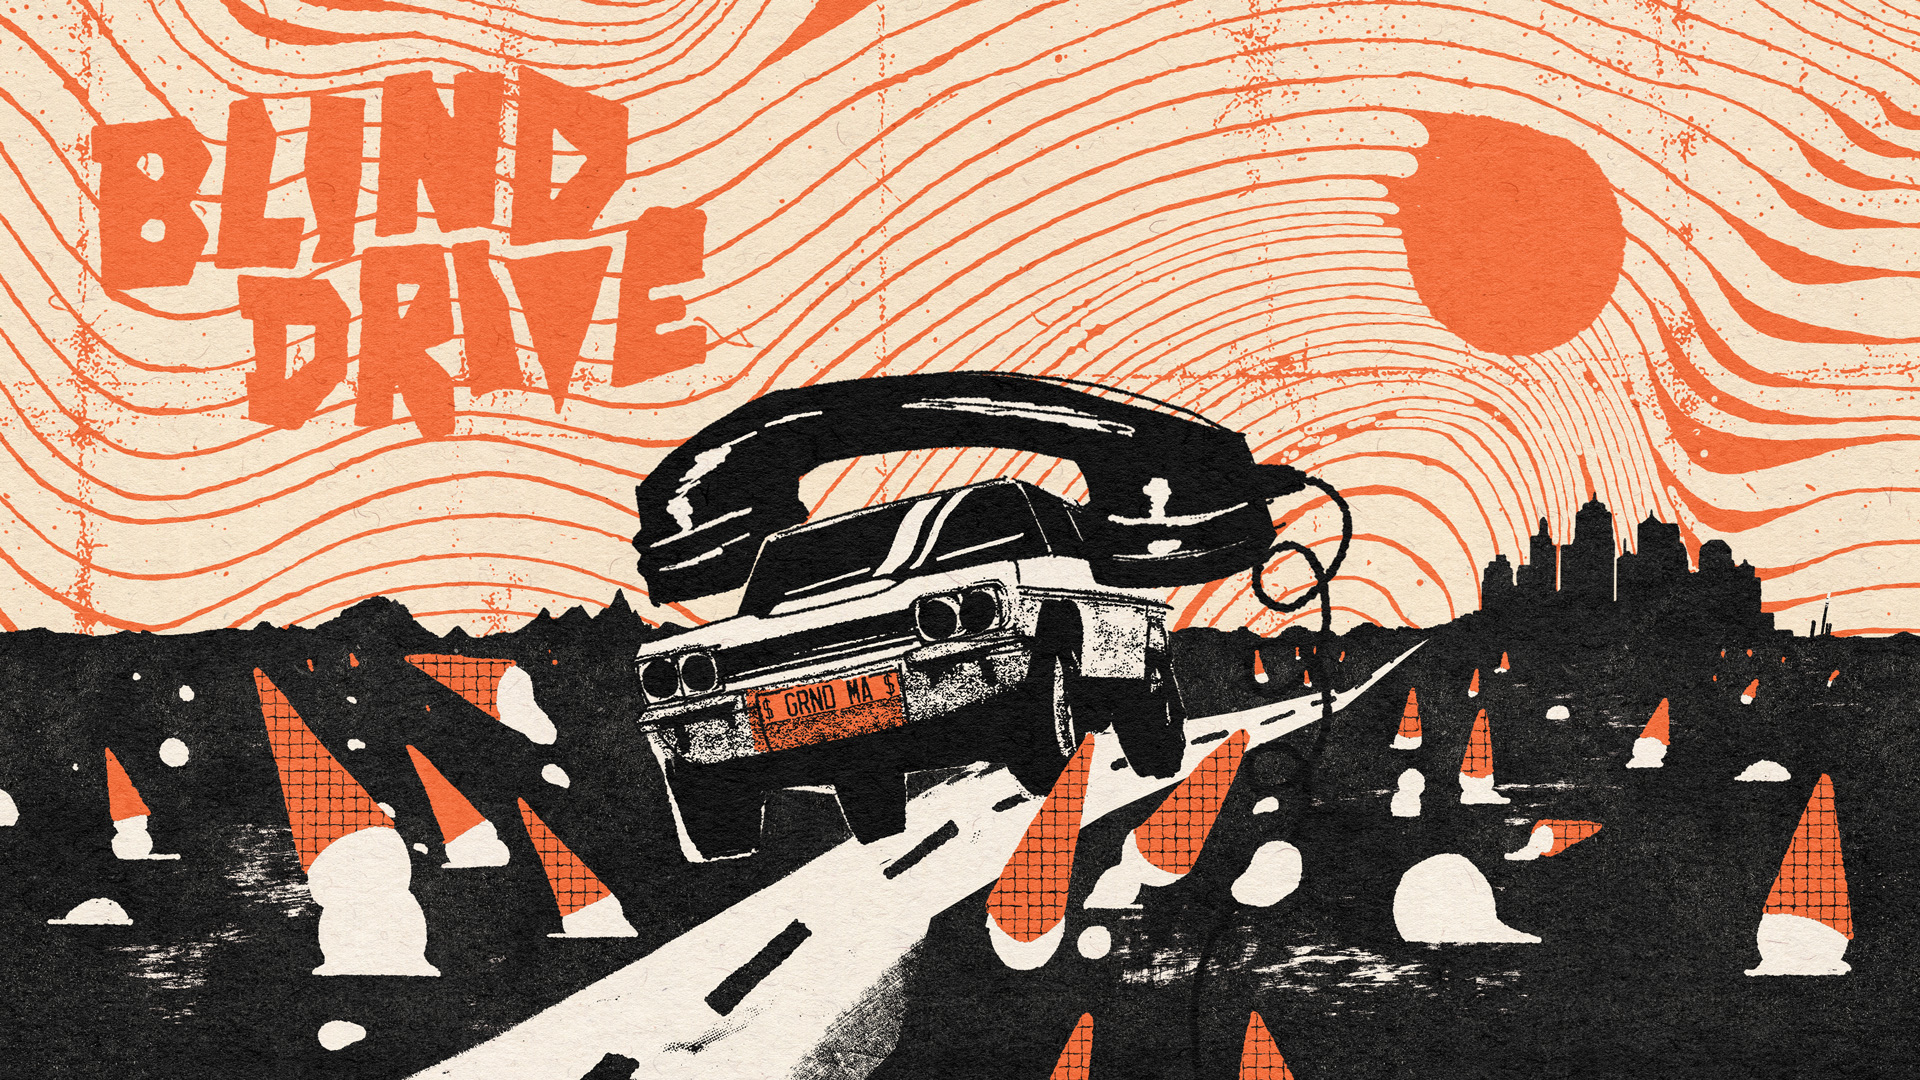 Blind Drive for Android